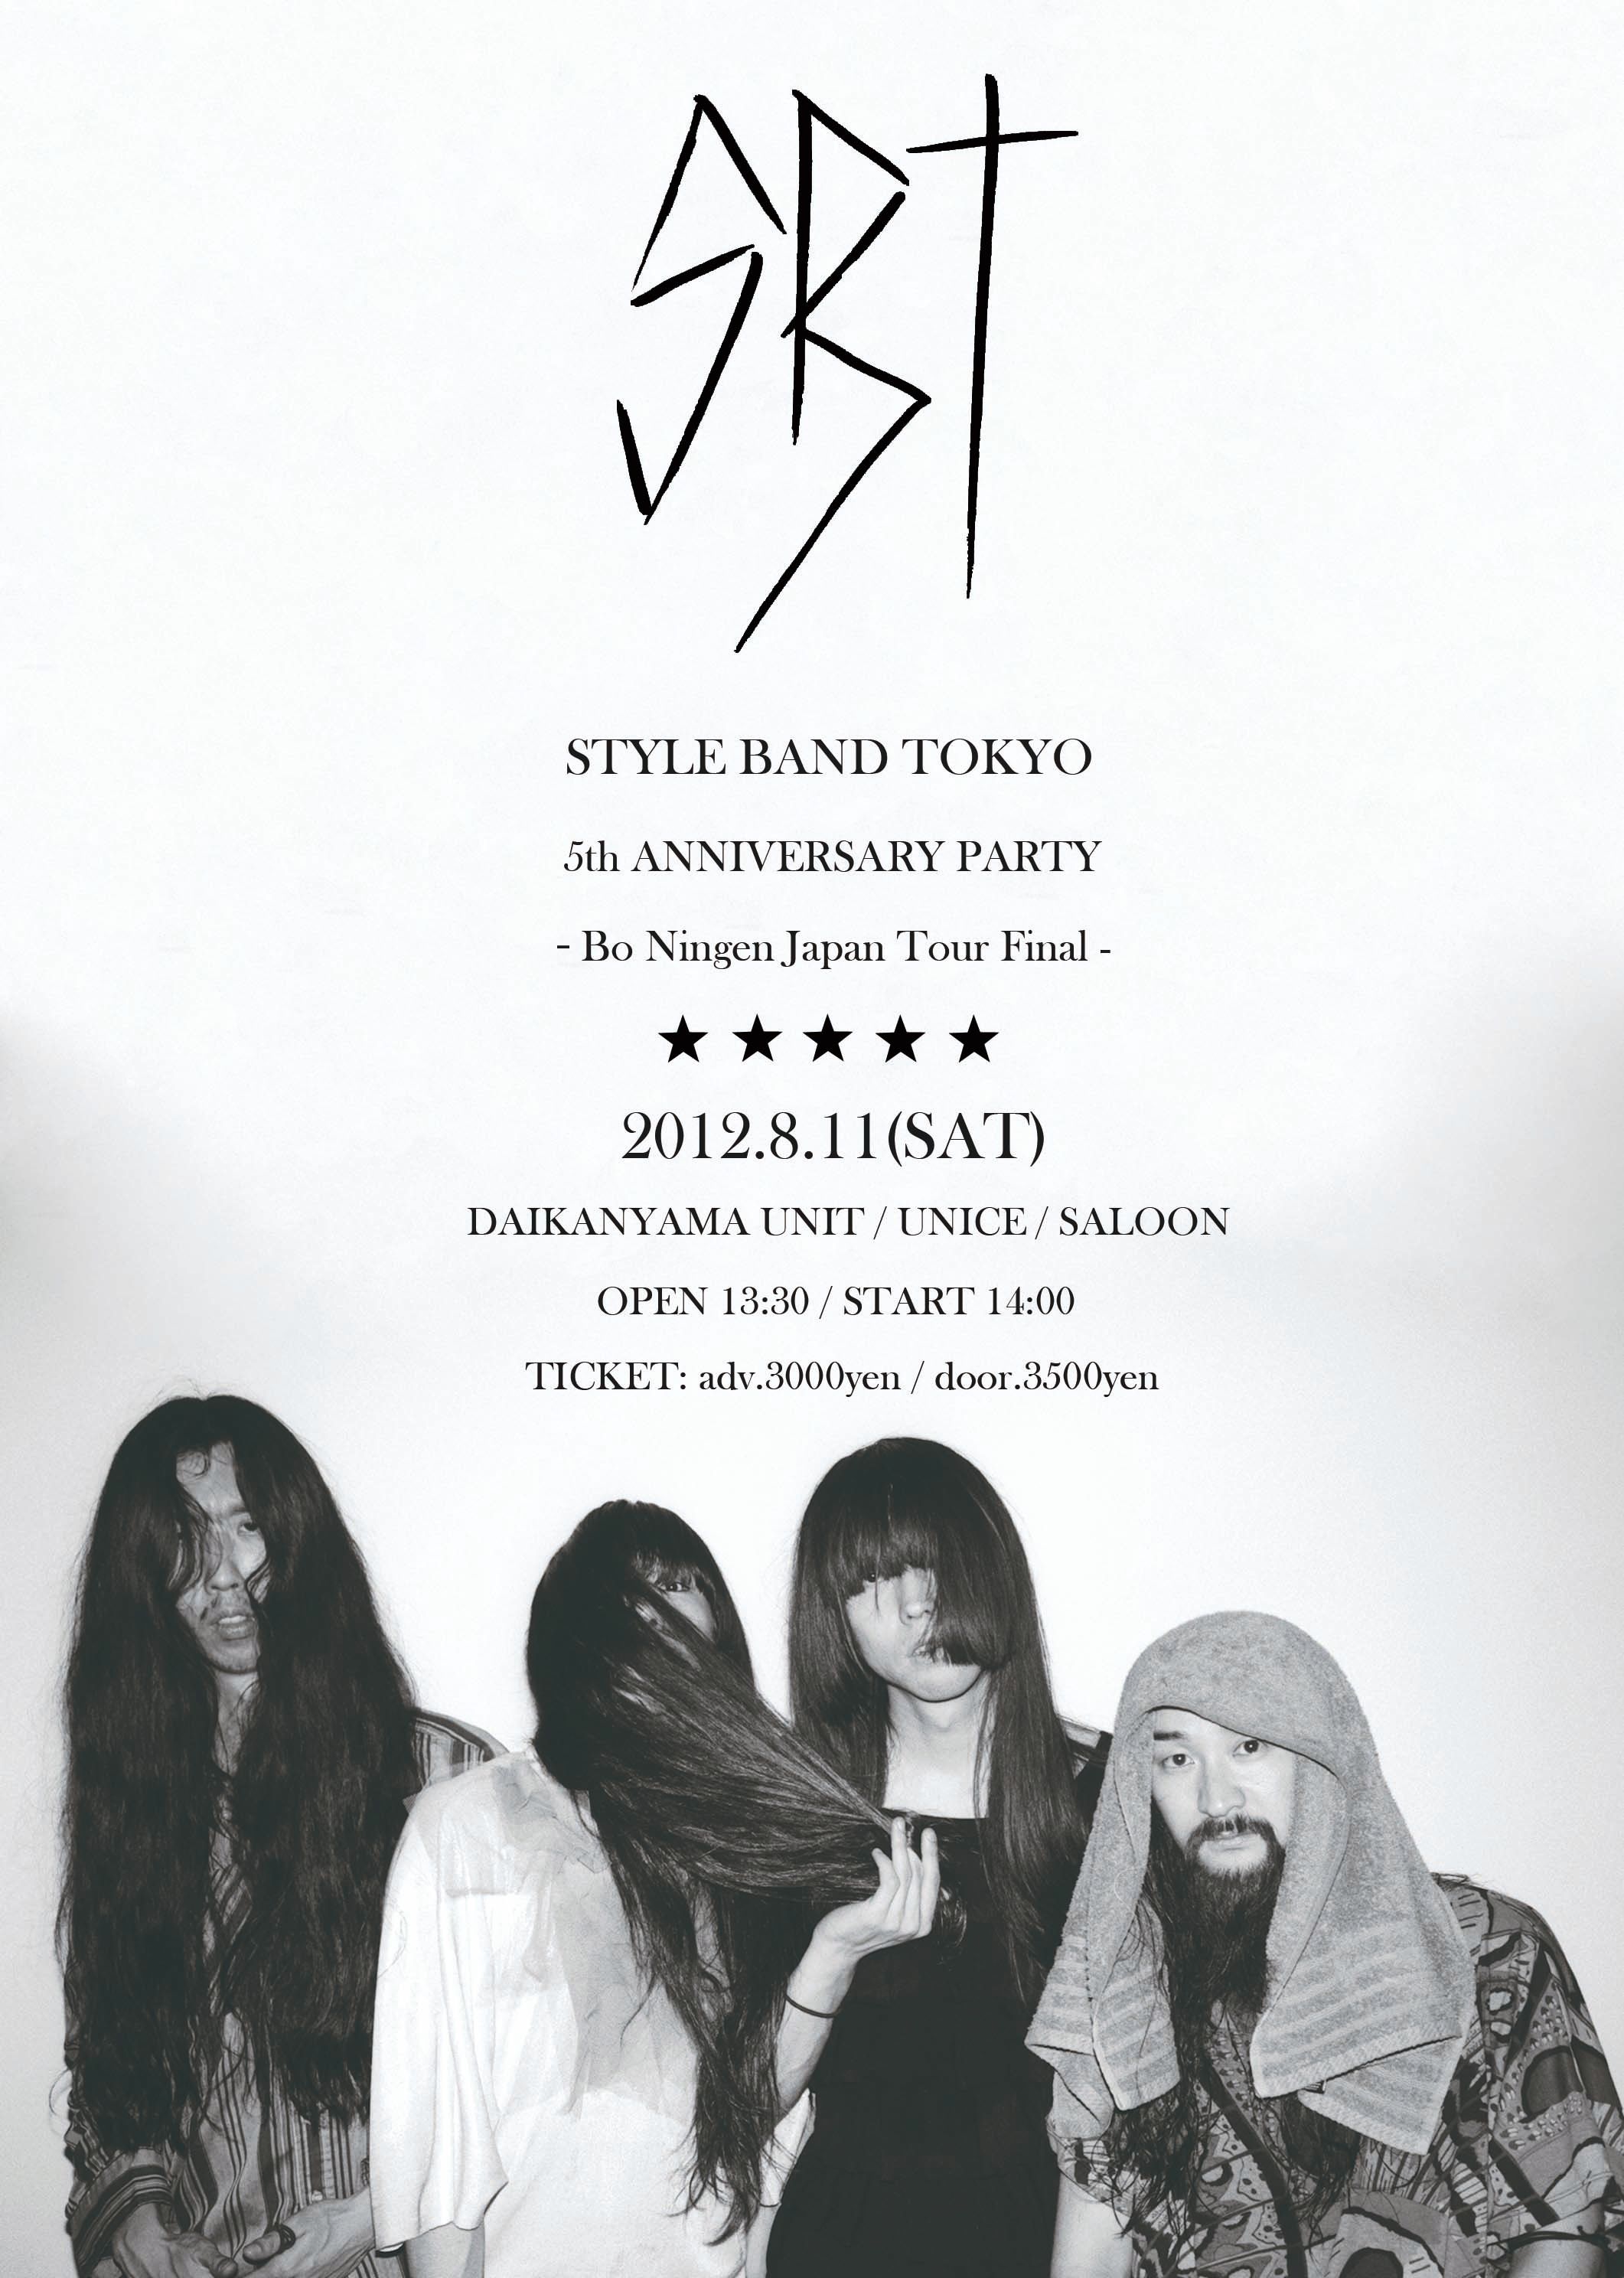 STYLE BAND TOKYO 5th ANNIVERSARY PARTY Main Image